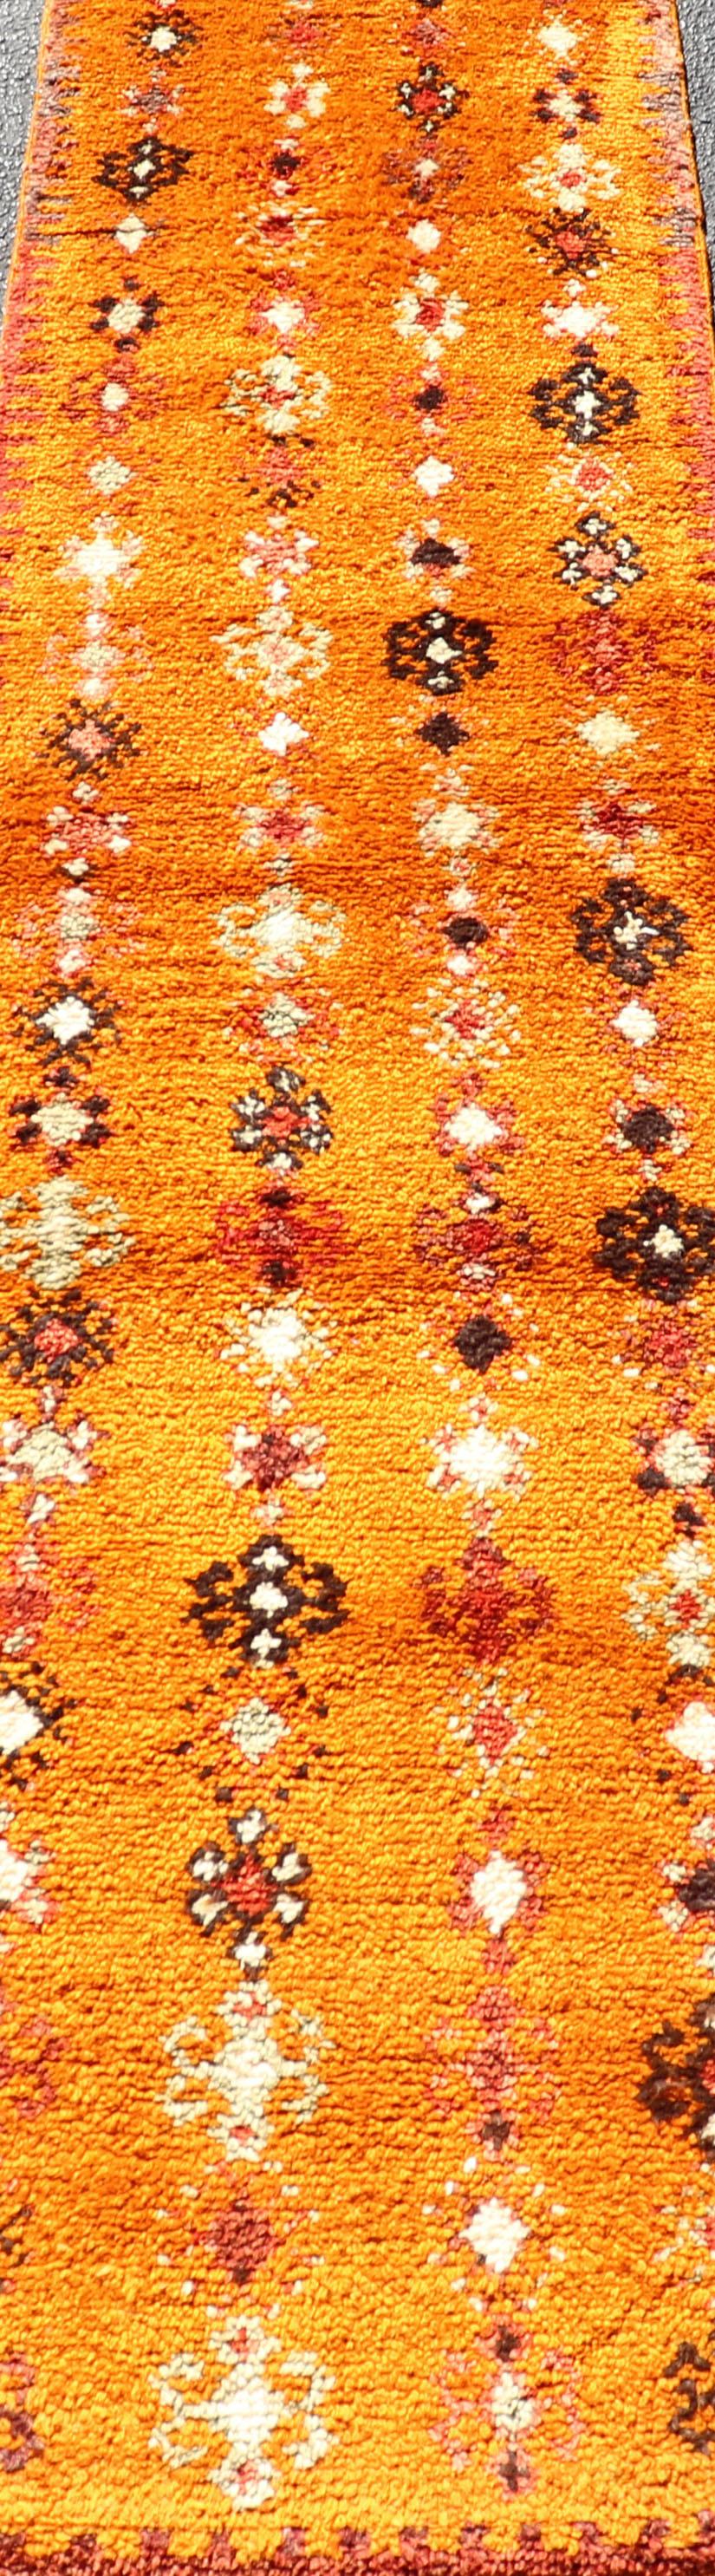 20th Century Vintage Moroccan Runner with Sub-Geometric Motifs in Saffron, Gold and Orange